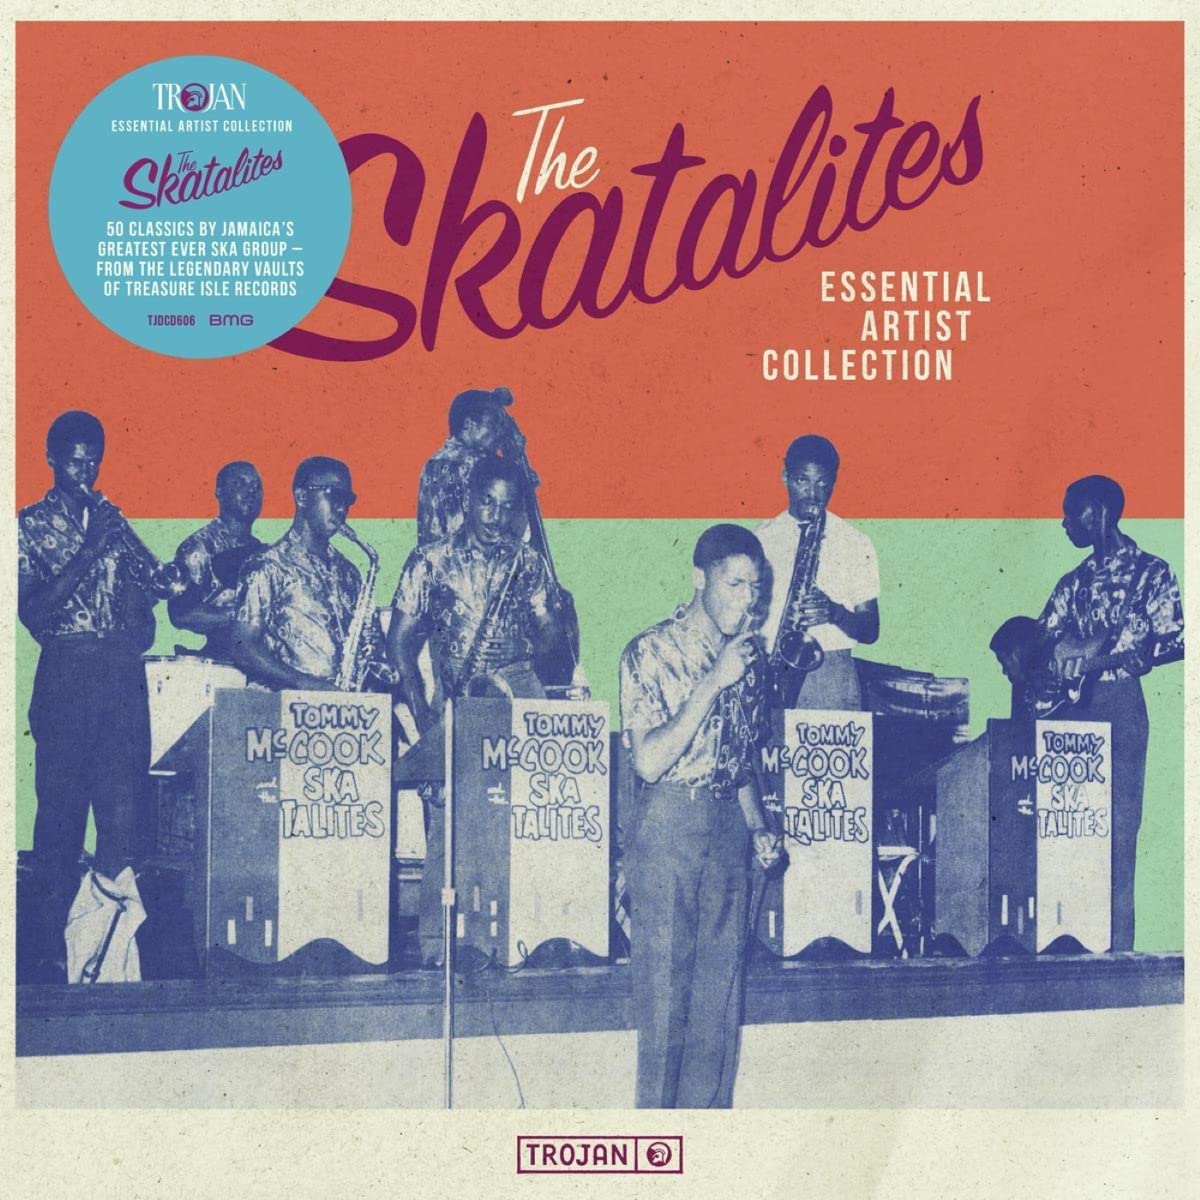 Skatalites, The/Essential Artist Collection [CD]